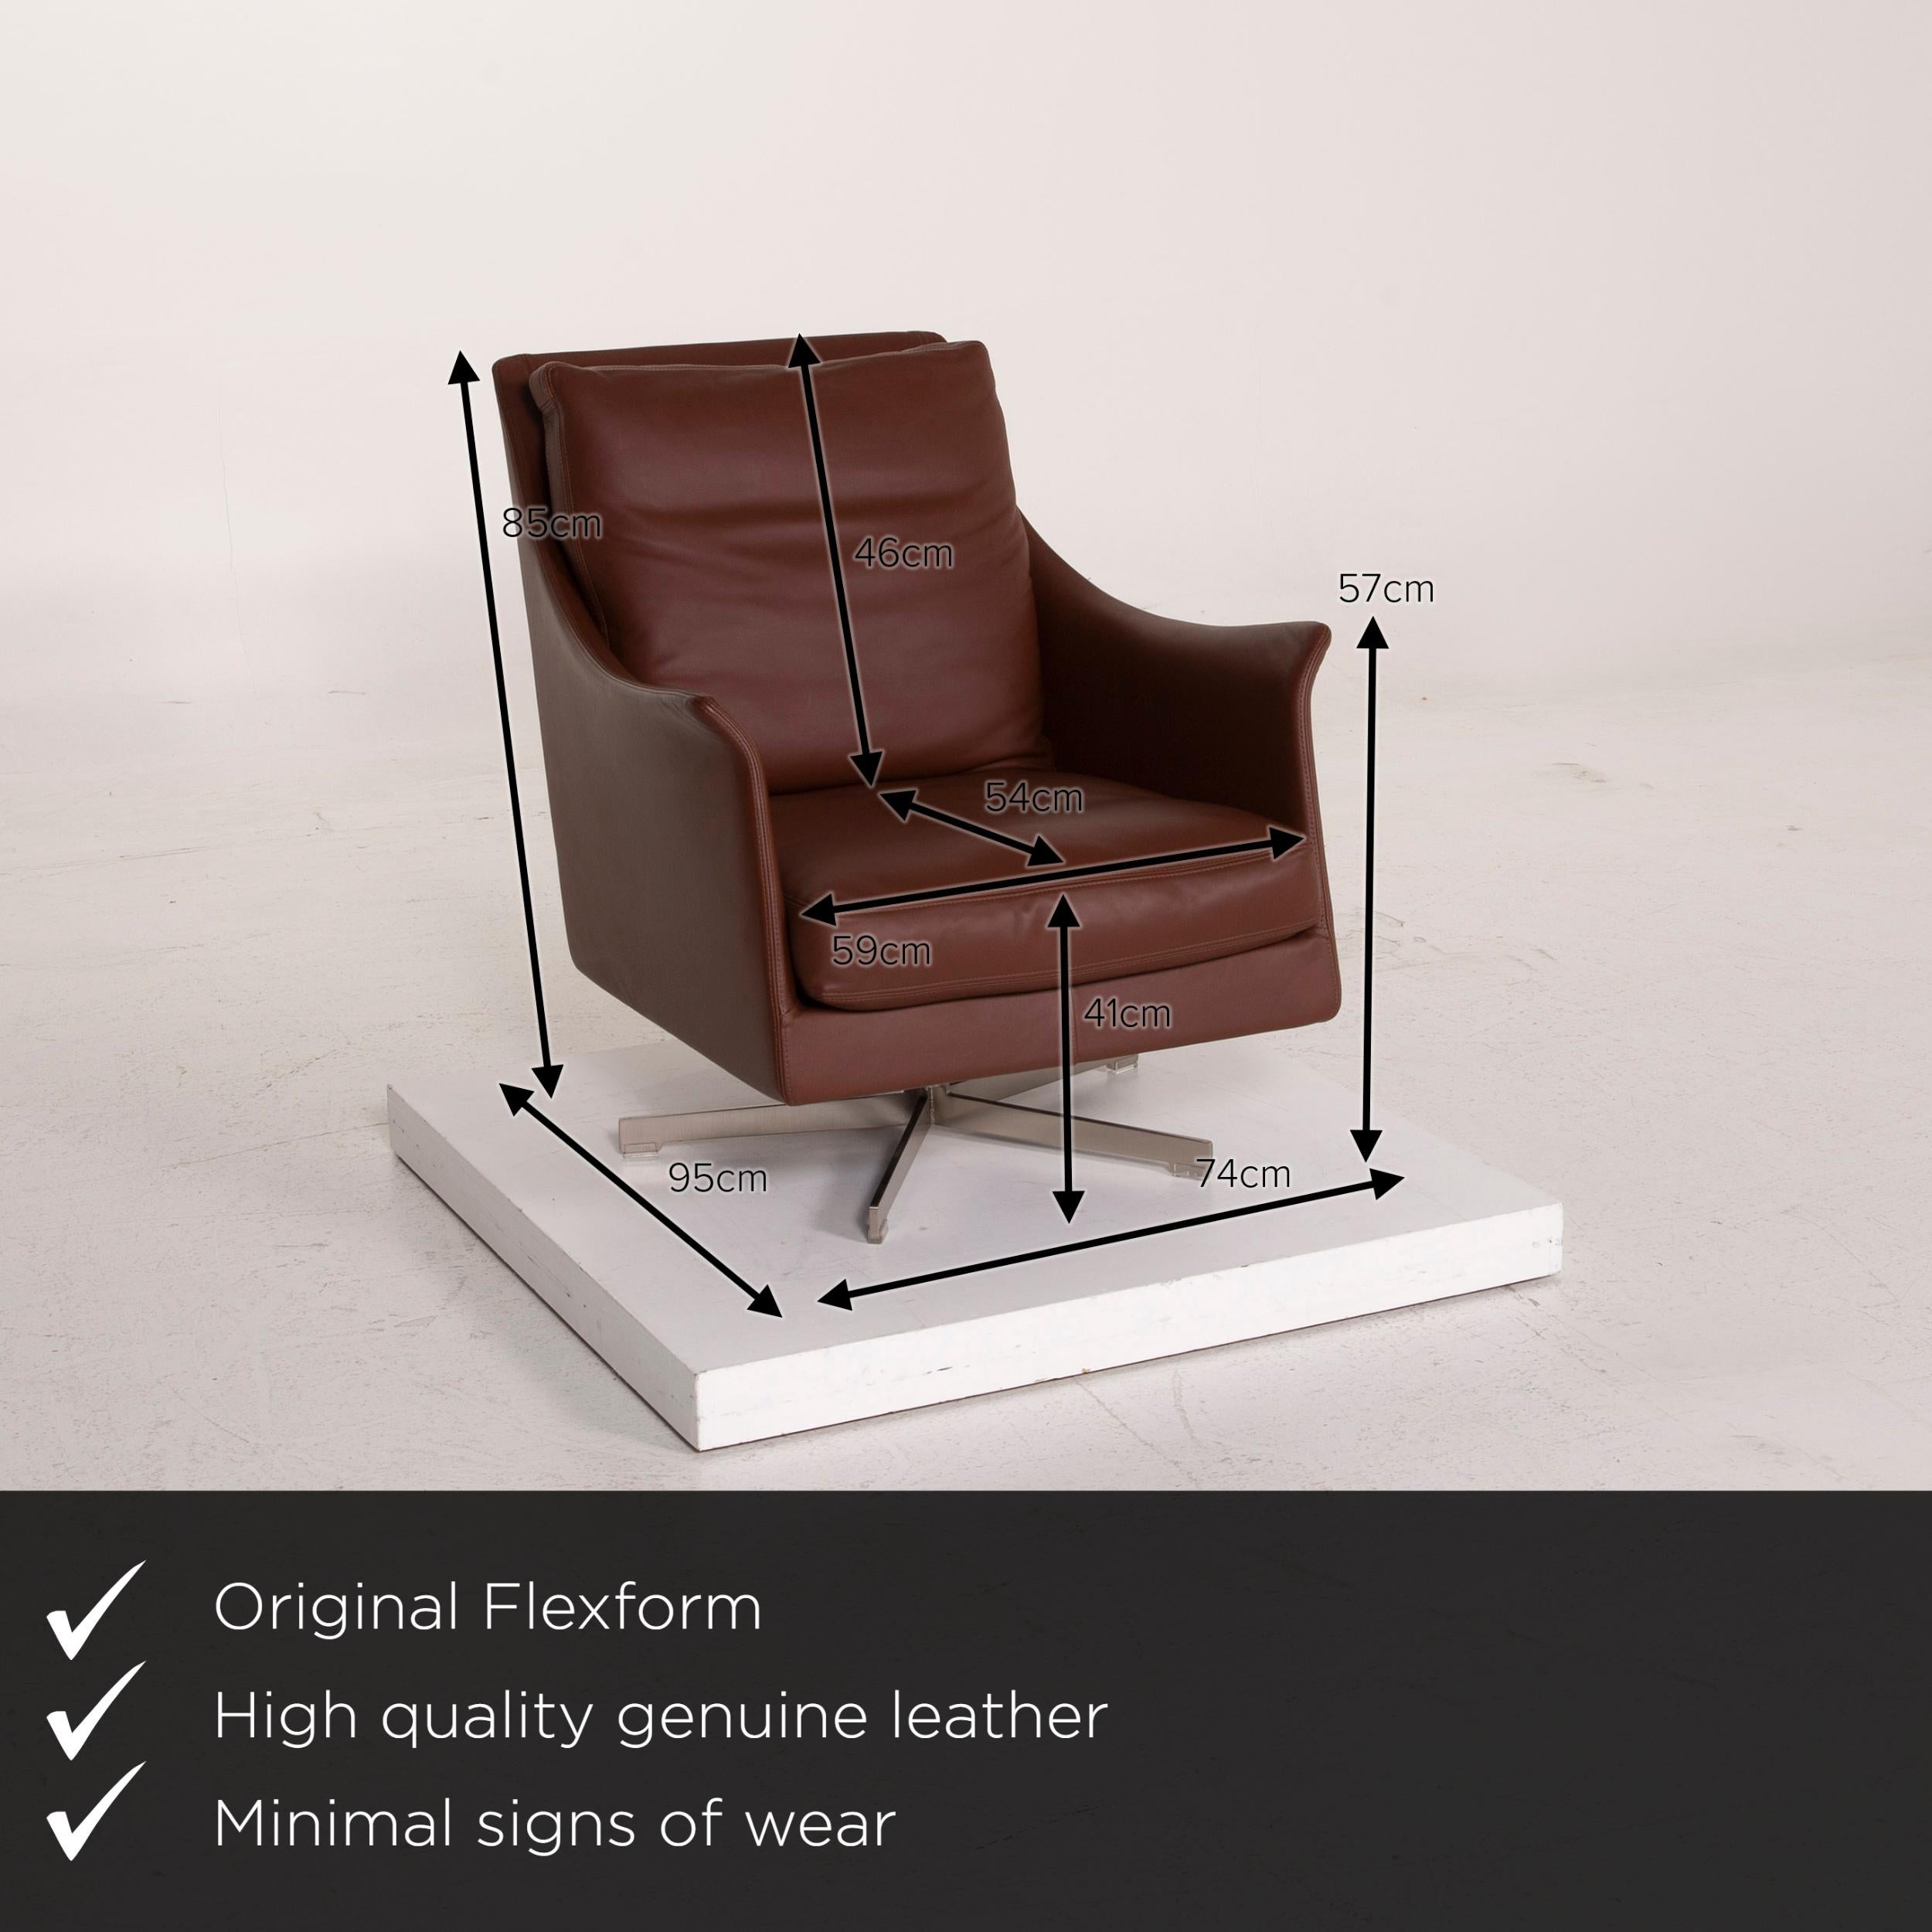 We present to you a Flexform boss leather armchair brown.

 

 Product measurements in centimeters:
 

Depth 95
Width 74
Height 85
Seat height 41
Rest height 57
Seat depth 54
Seat width 59
Back height 46.